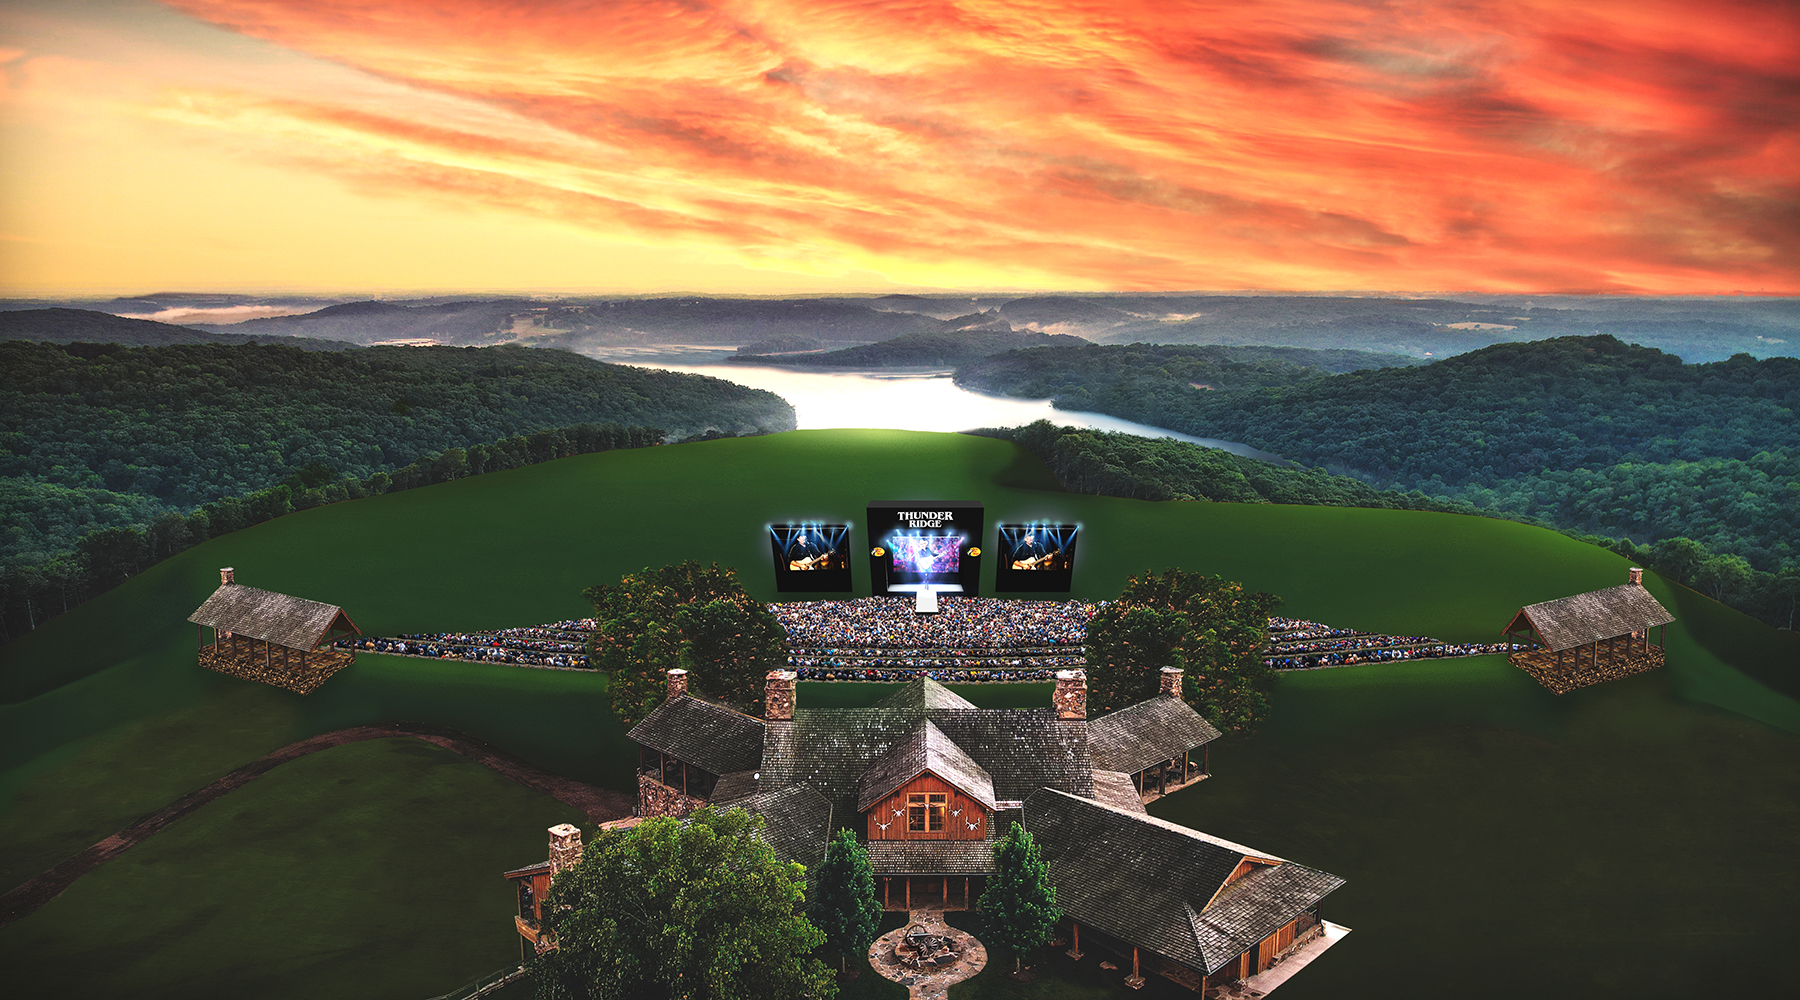 Rendering of concert taking place at Thunder ridge nature arena